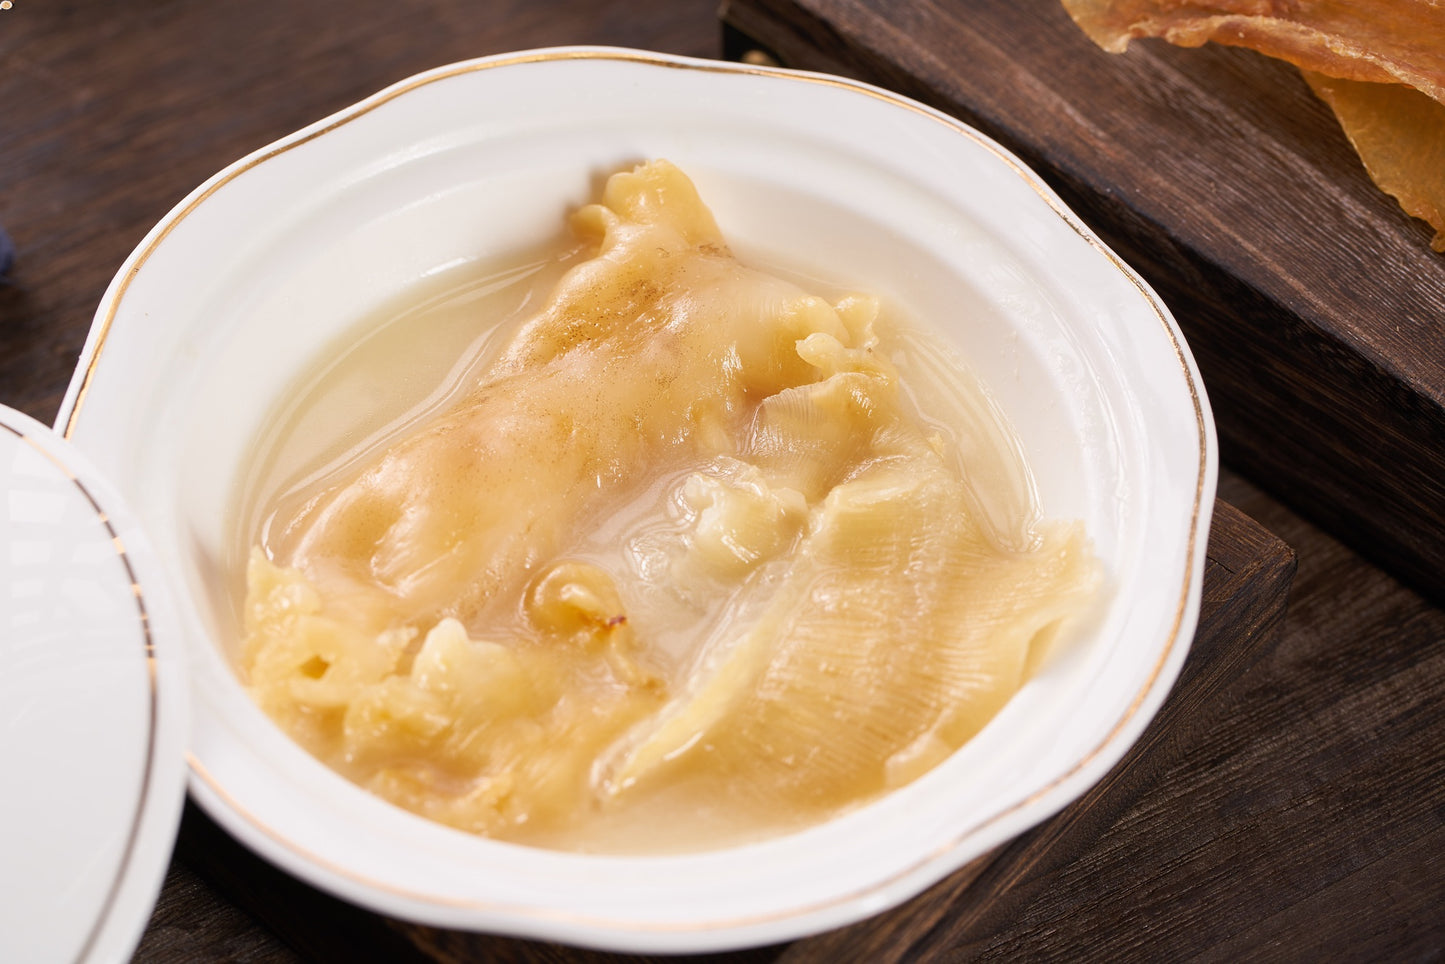 Shark Fin with Fish Maw Soup (1 person size)